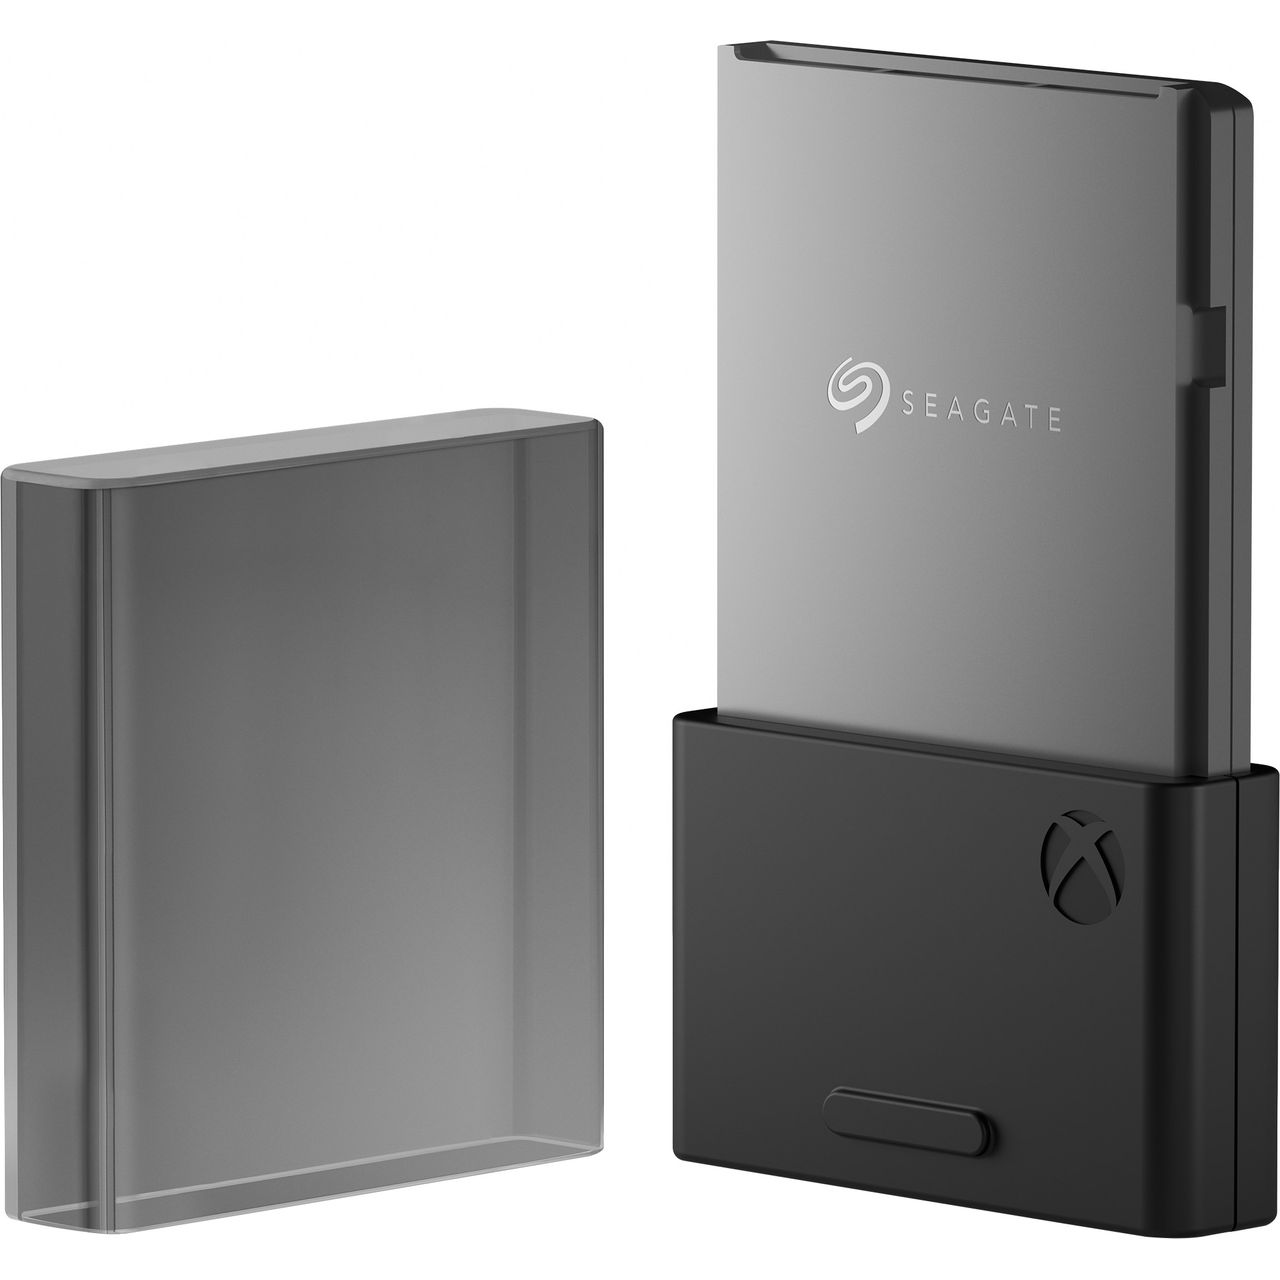 Seagate Game Drive For Xbox 1TB Expansion Card for Xbox Series X/S - Black